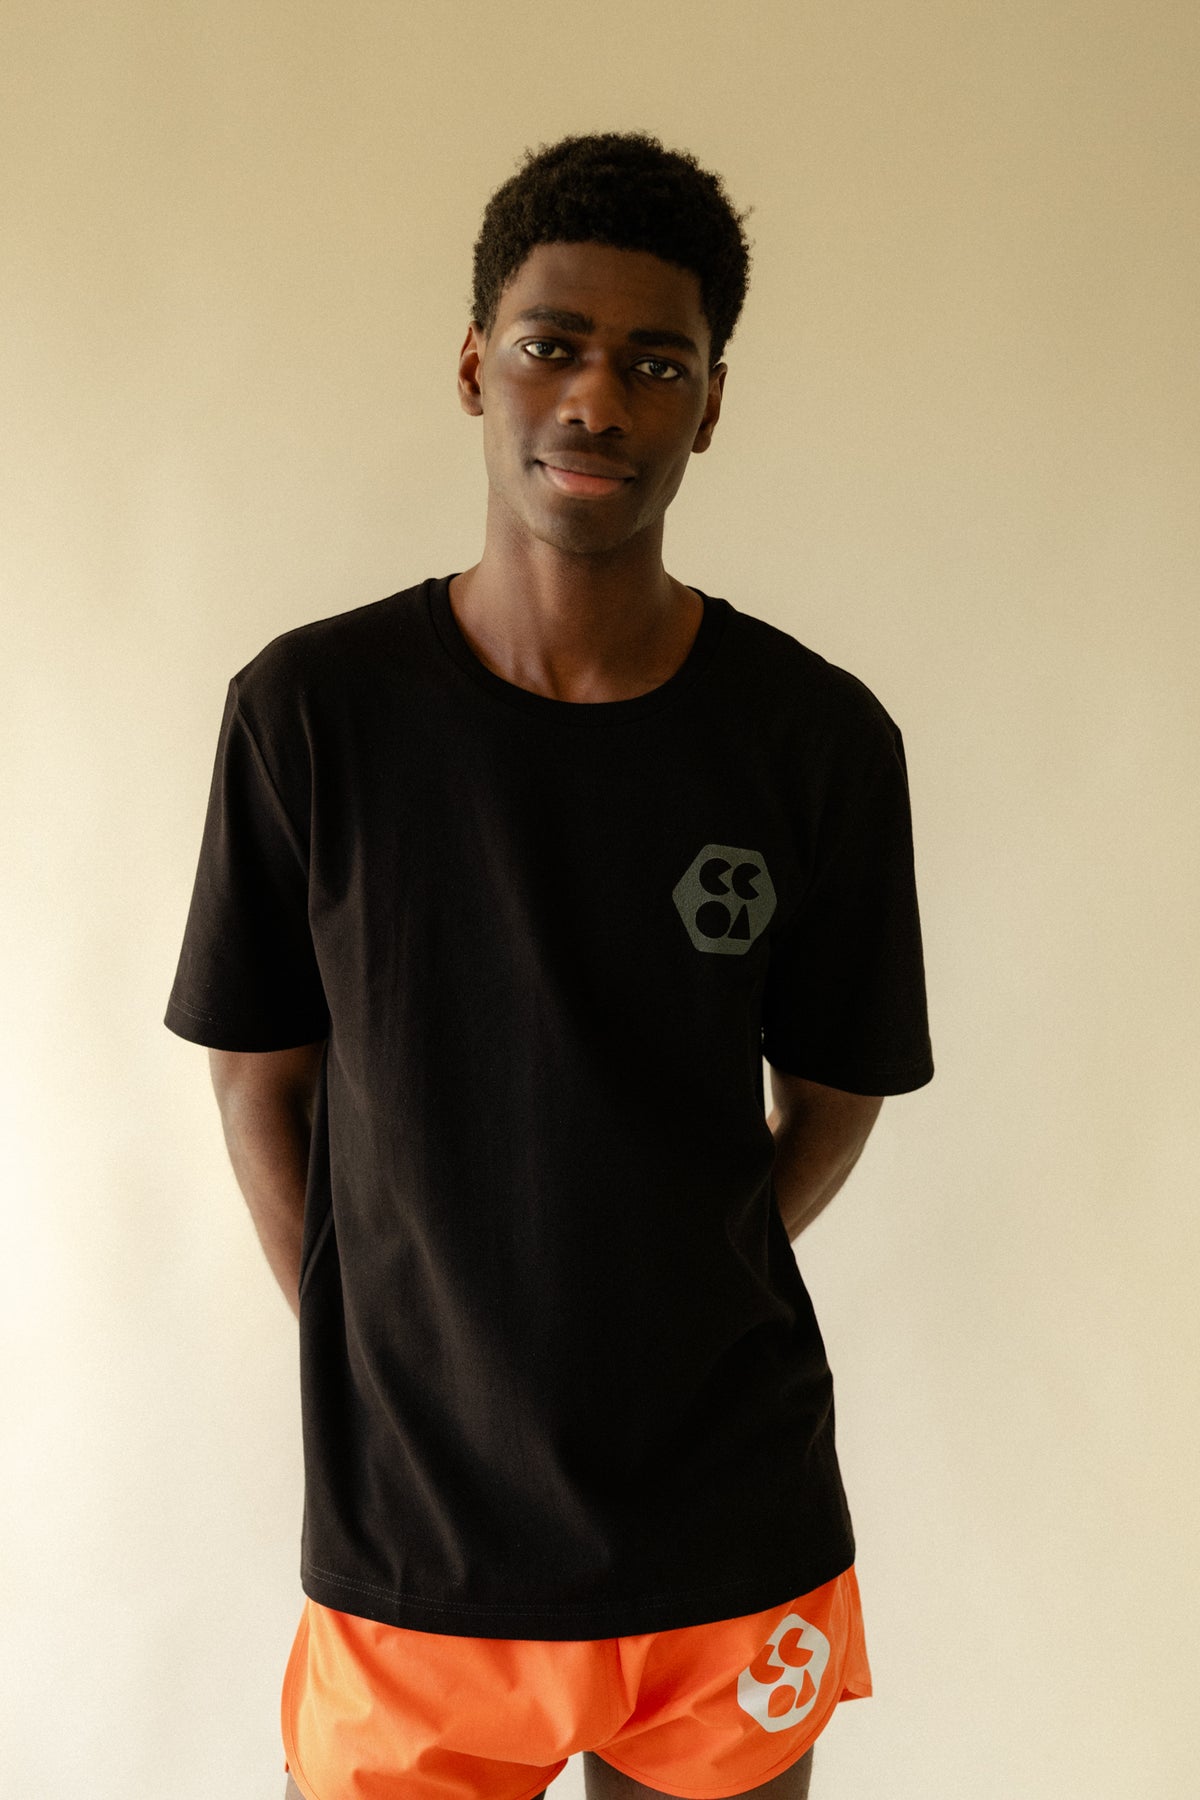 
            Black male wearing breathable short sleeve t shirt in black with CCOA logo